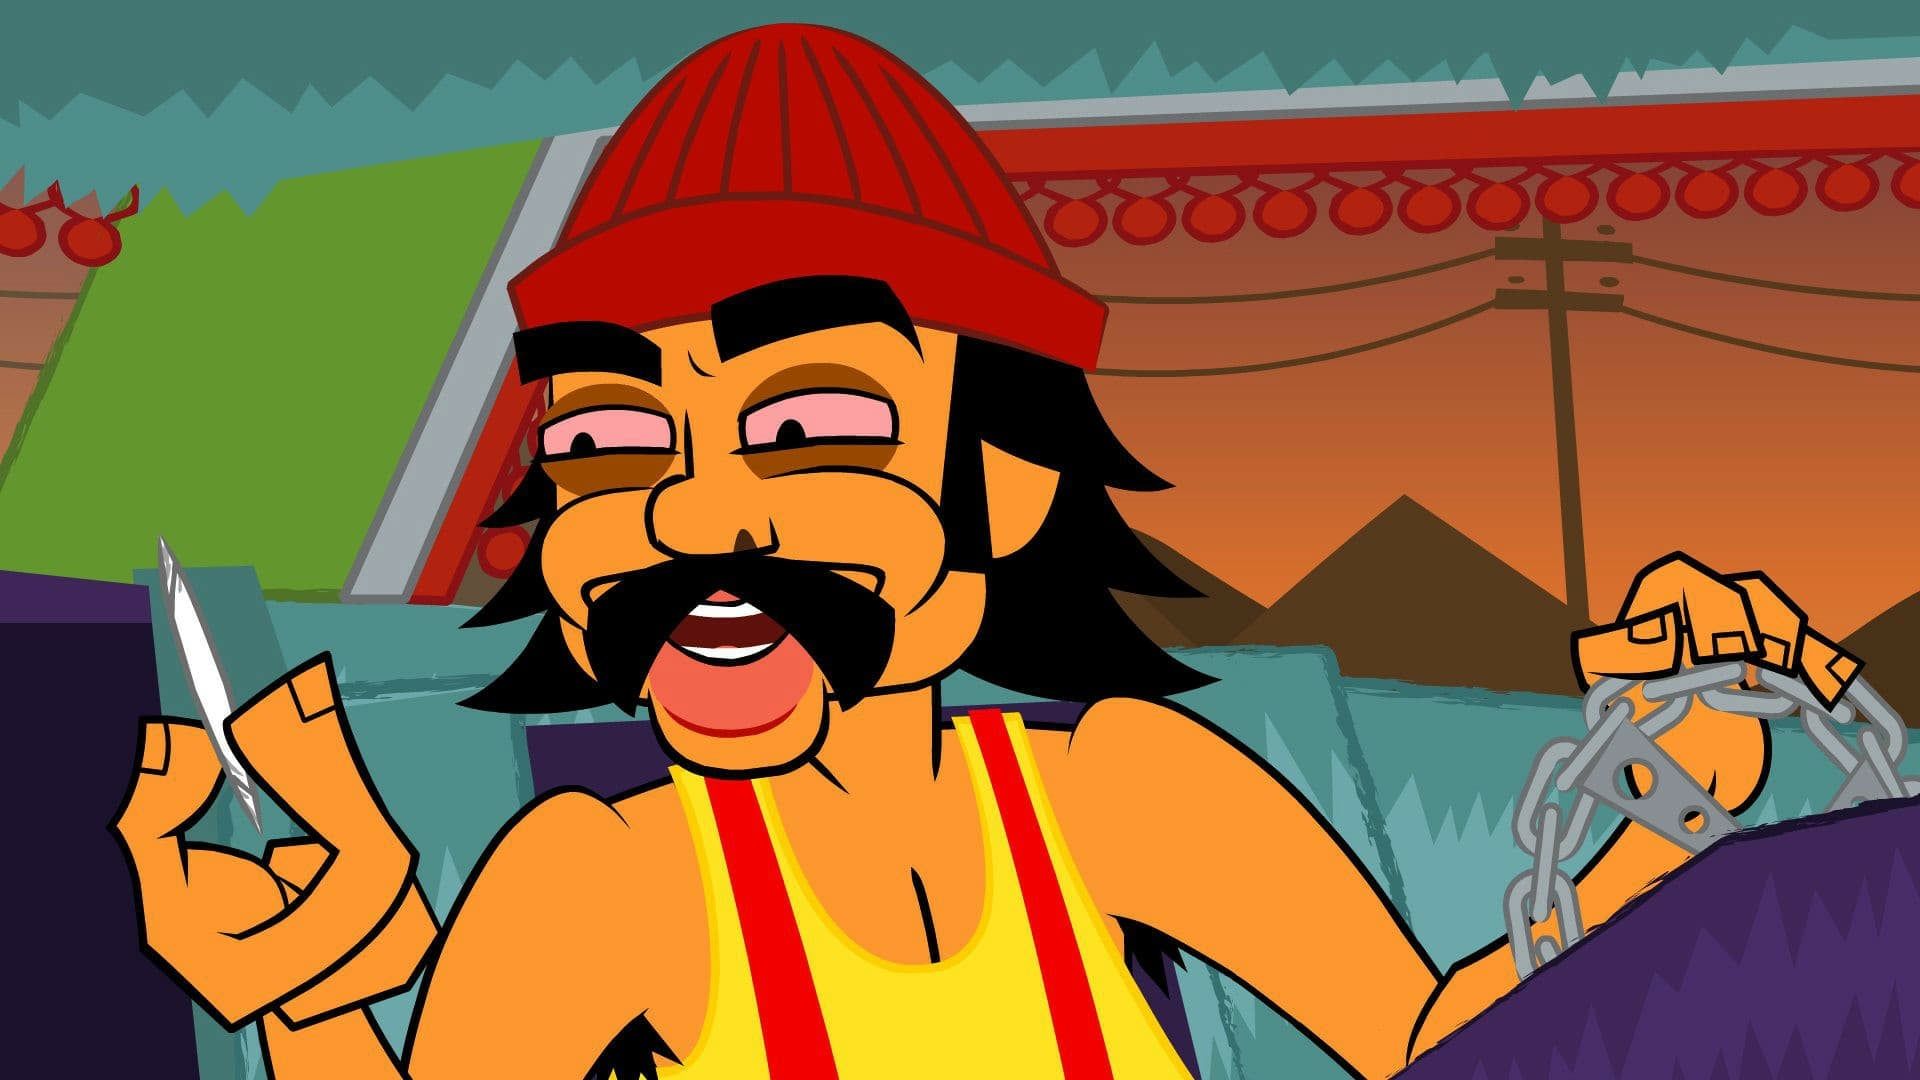 Cheech & Chong's Animated Movie background